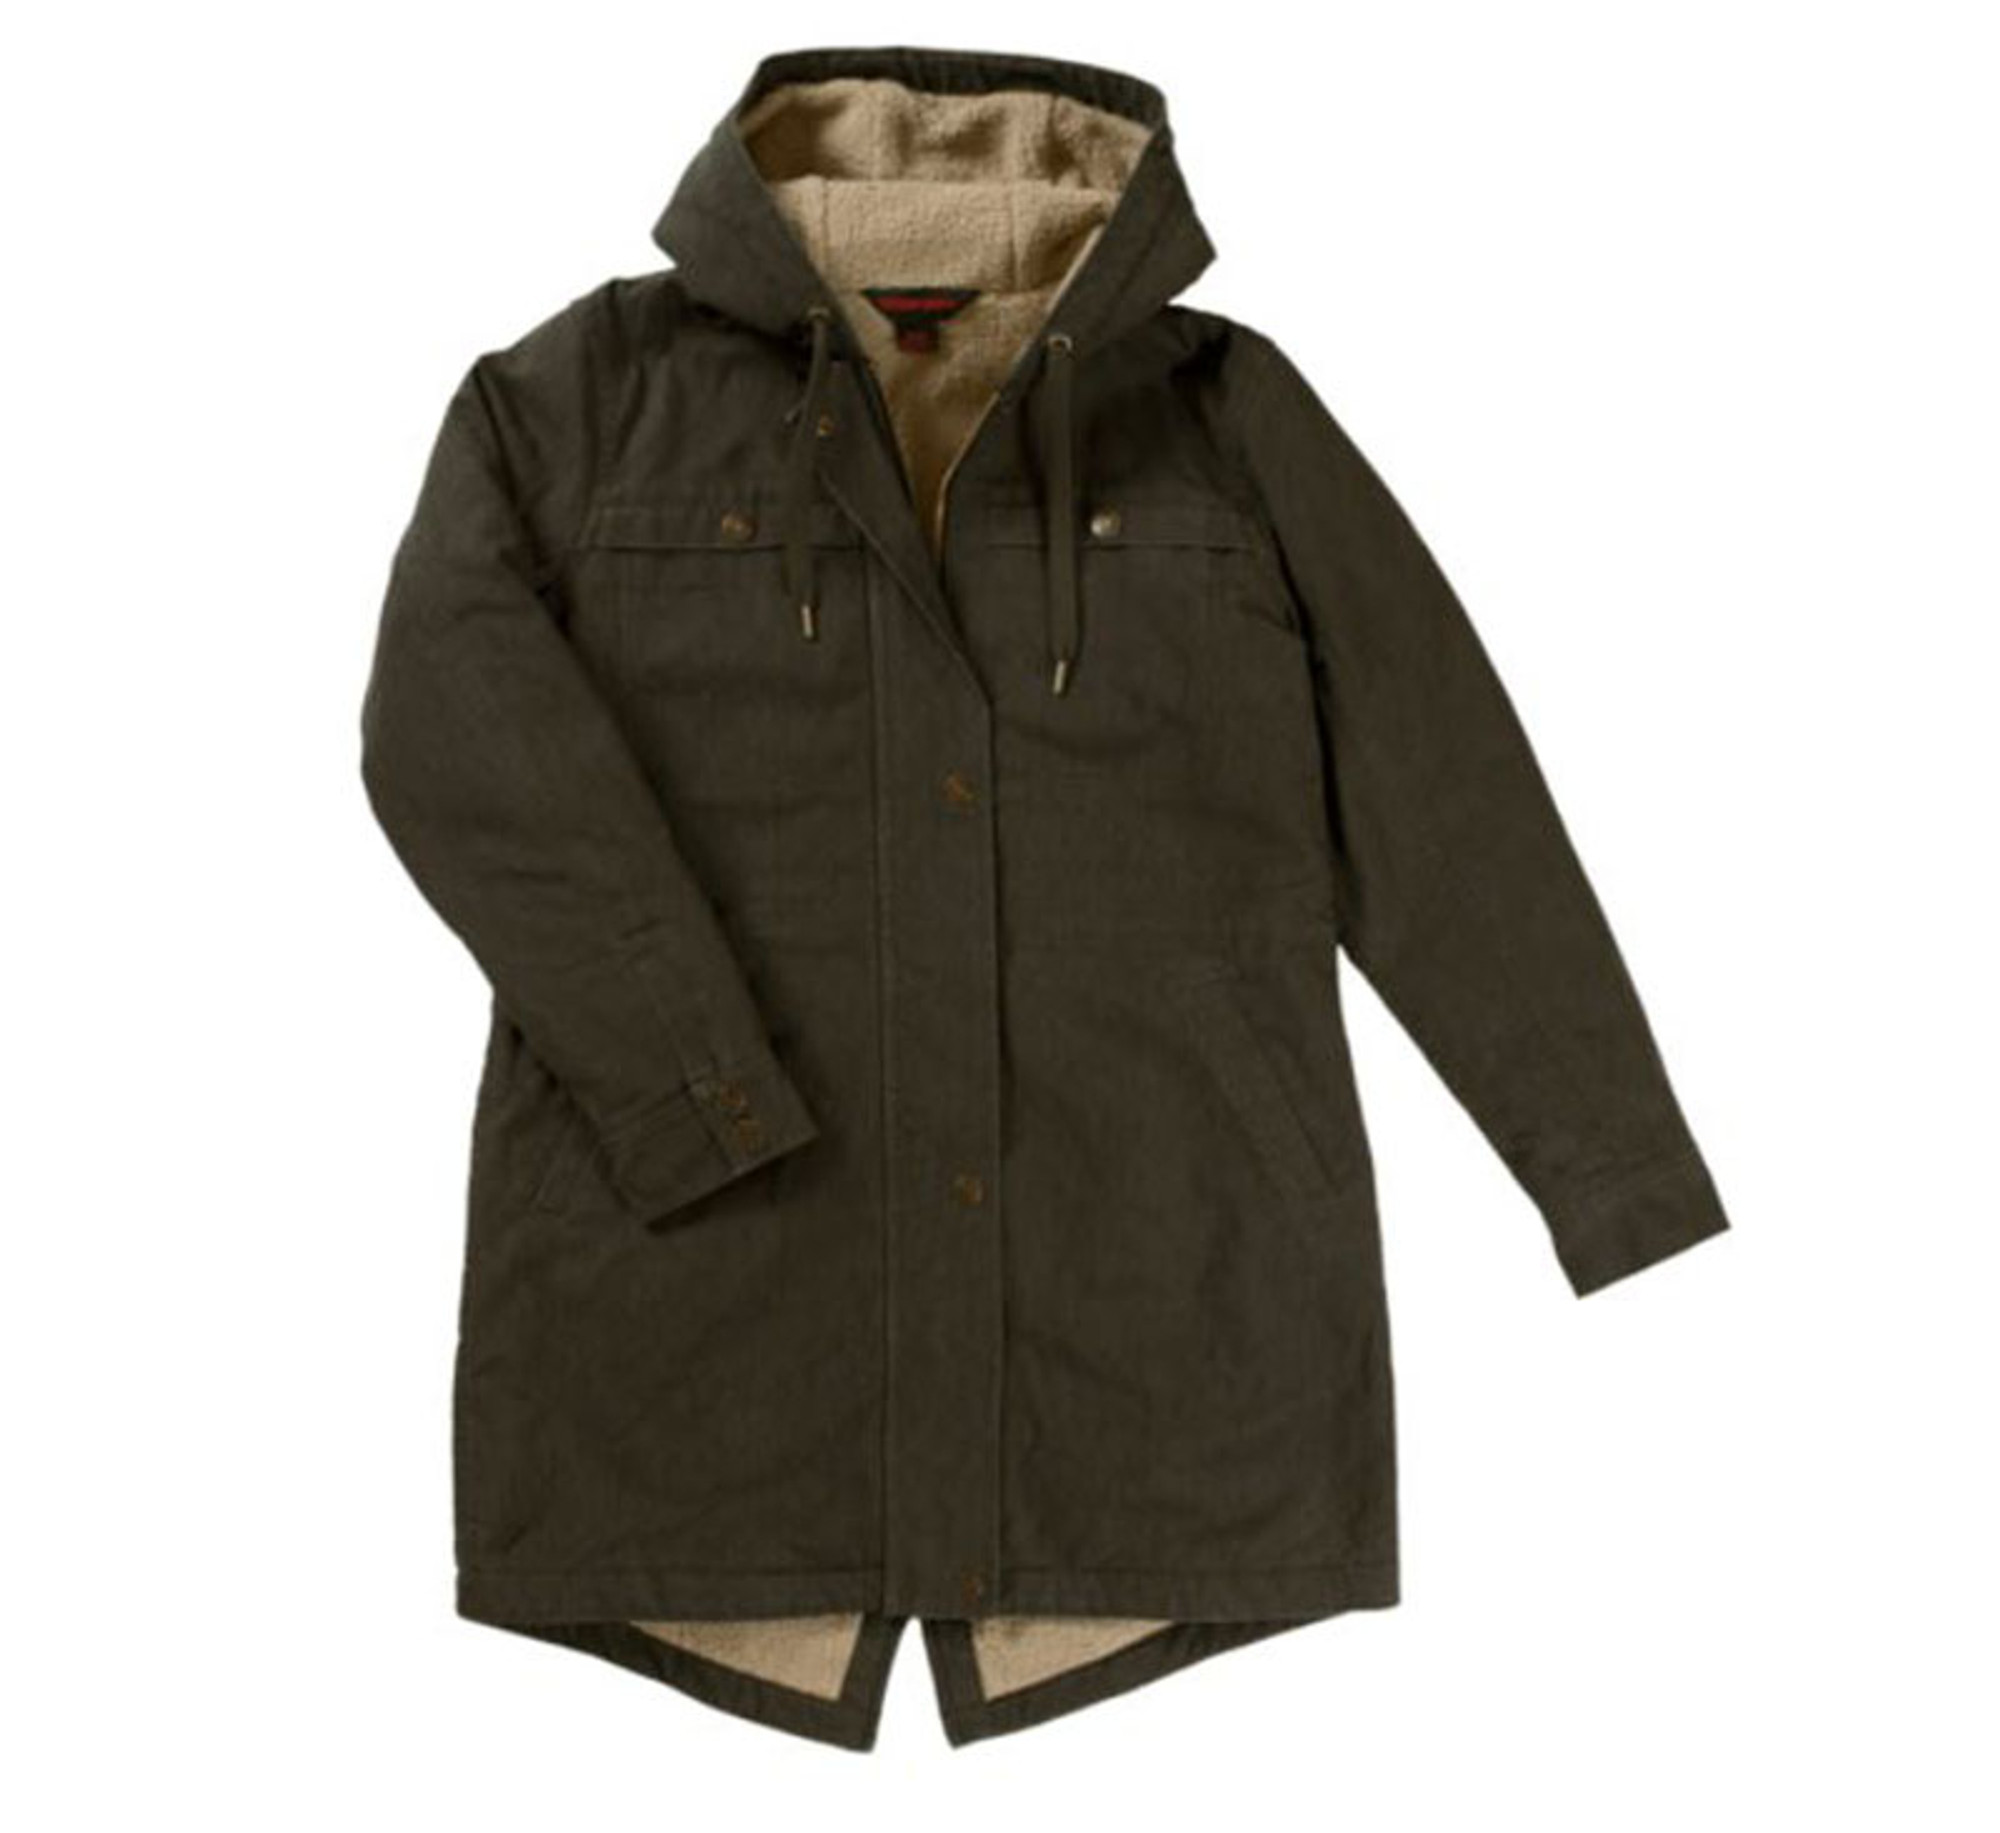 Women’s Sherpa Lined Jacket (Olive) - 2 Pack